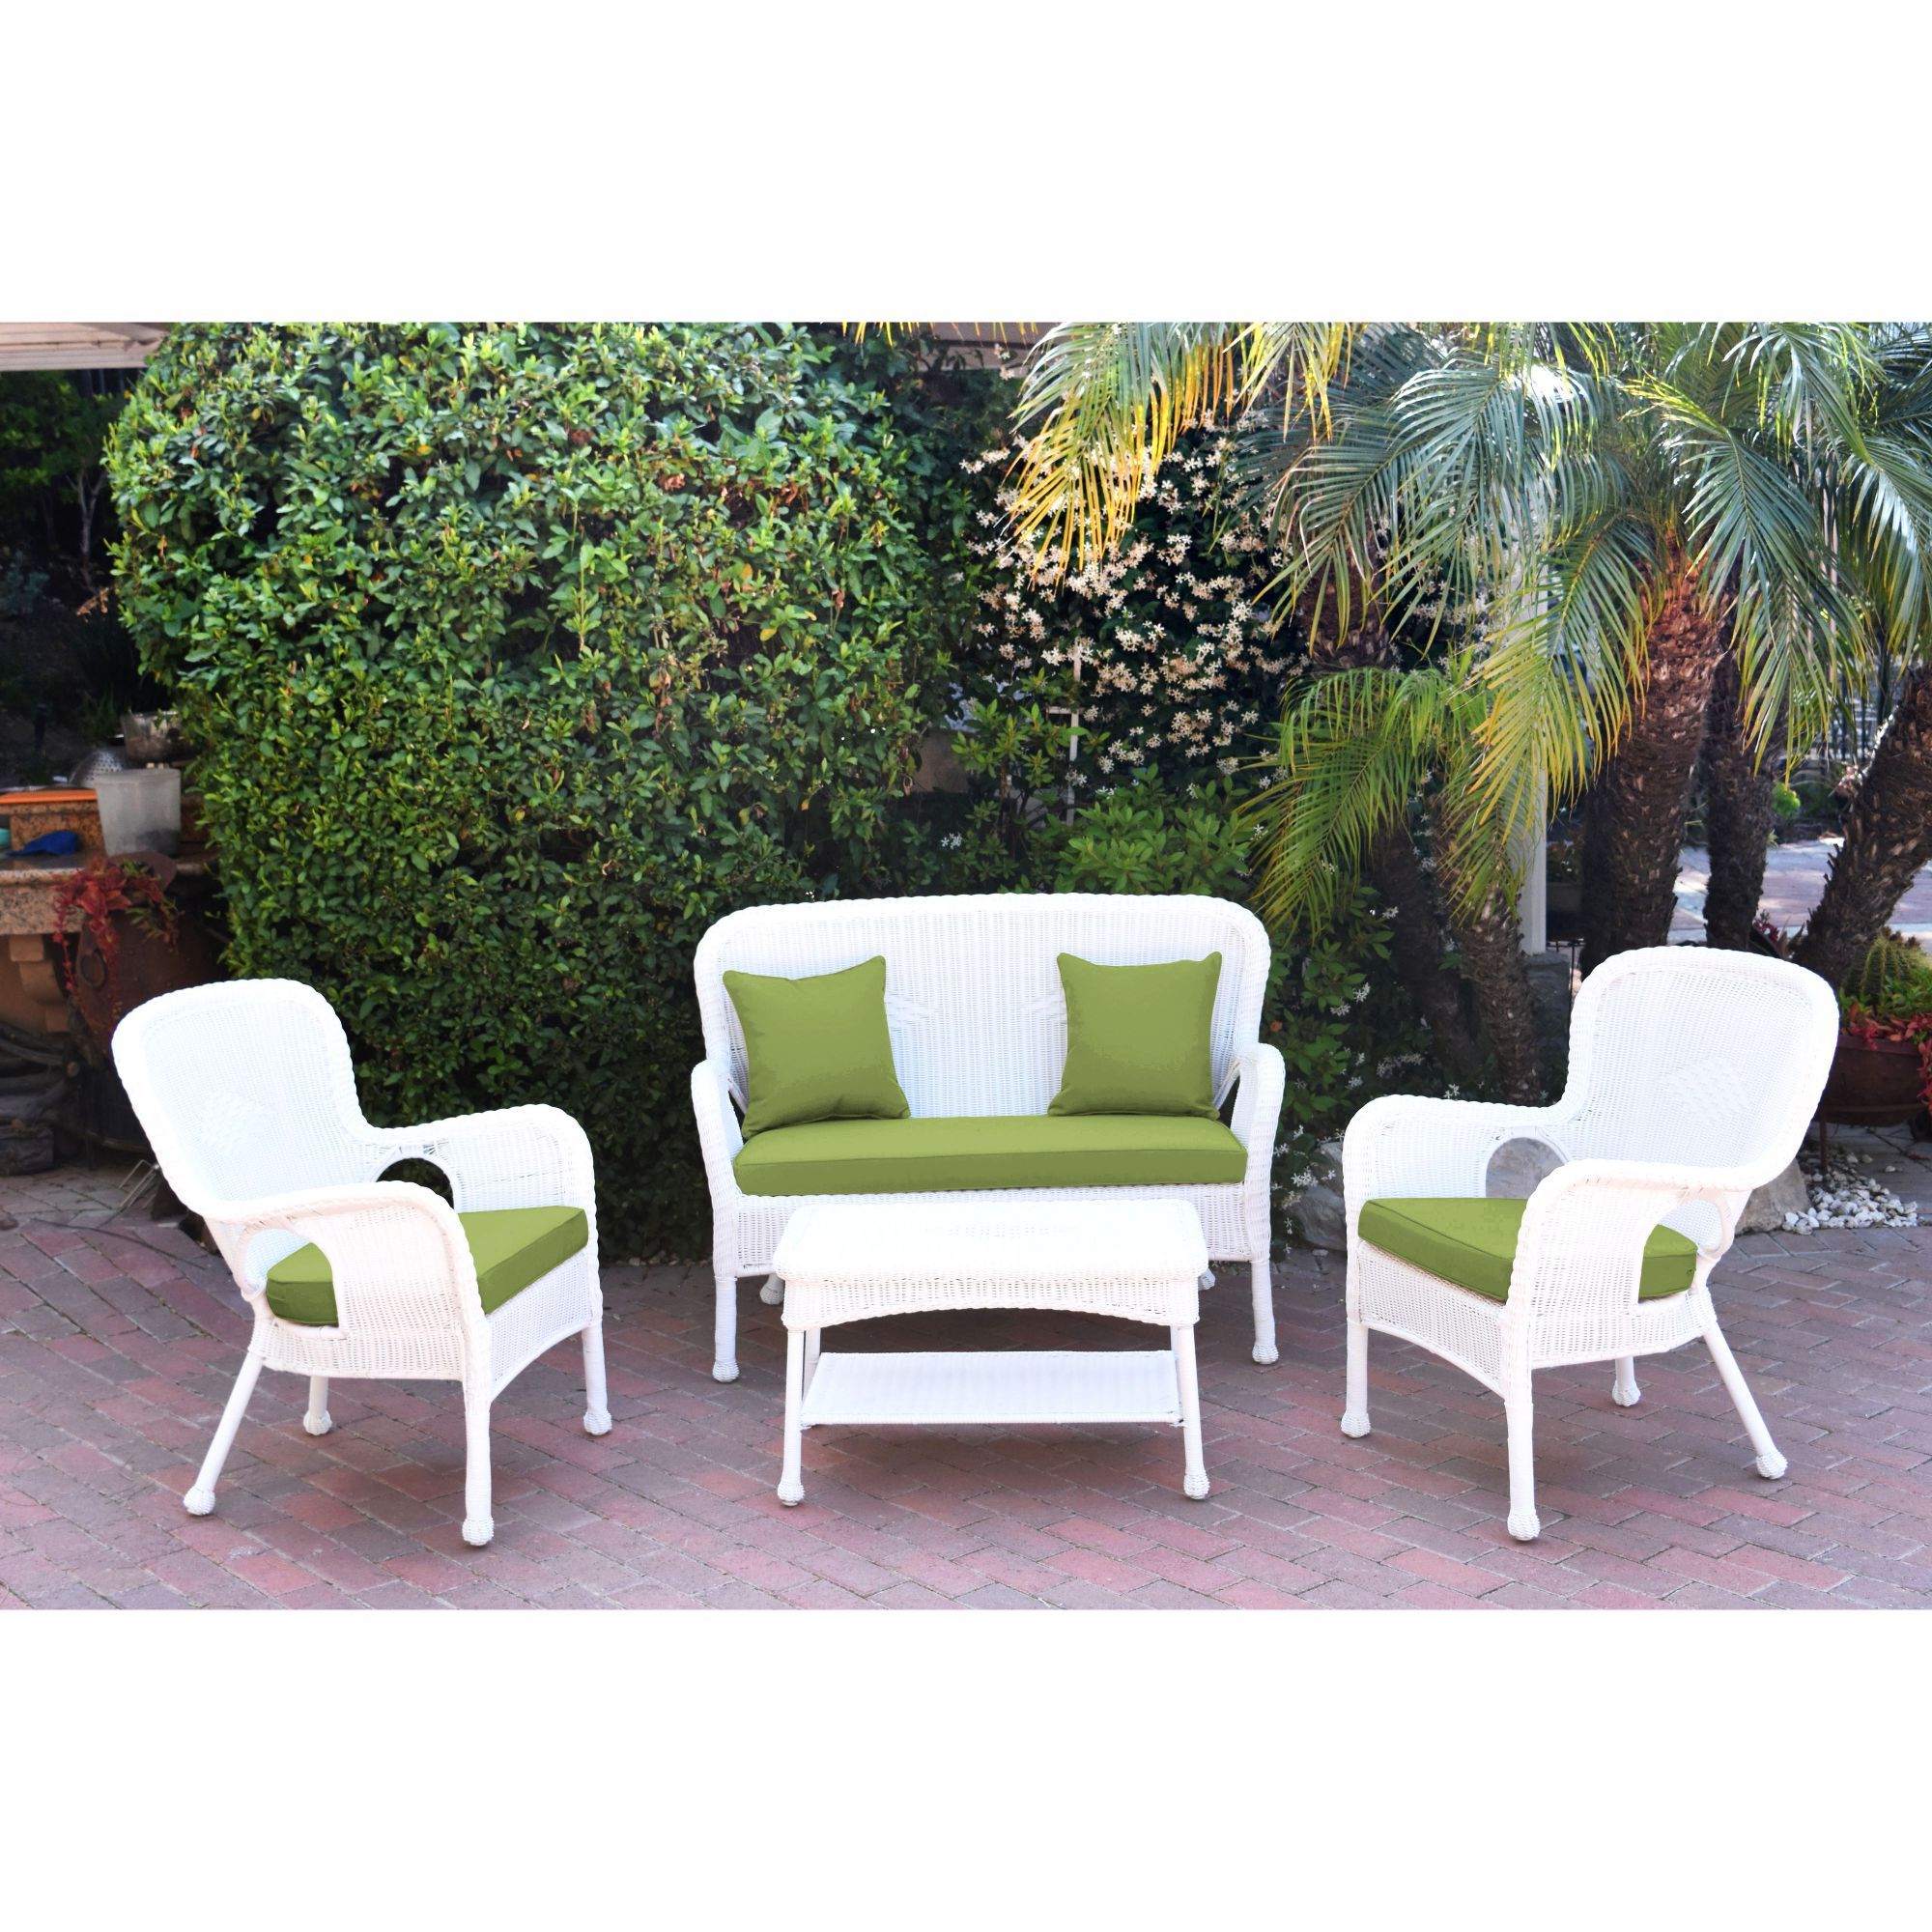 Preferred 4 Piece White Wicker Outdoor Furniture Patio Conversation Set – Sage In Patio Conversation Sets And Cushions (View 6 of 15)